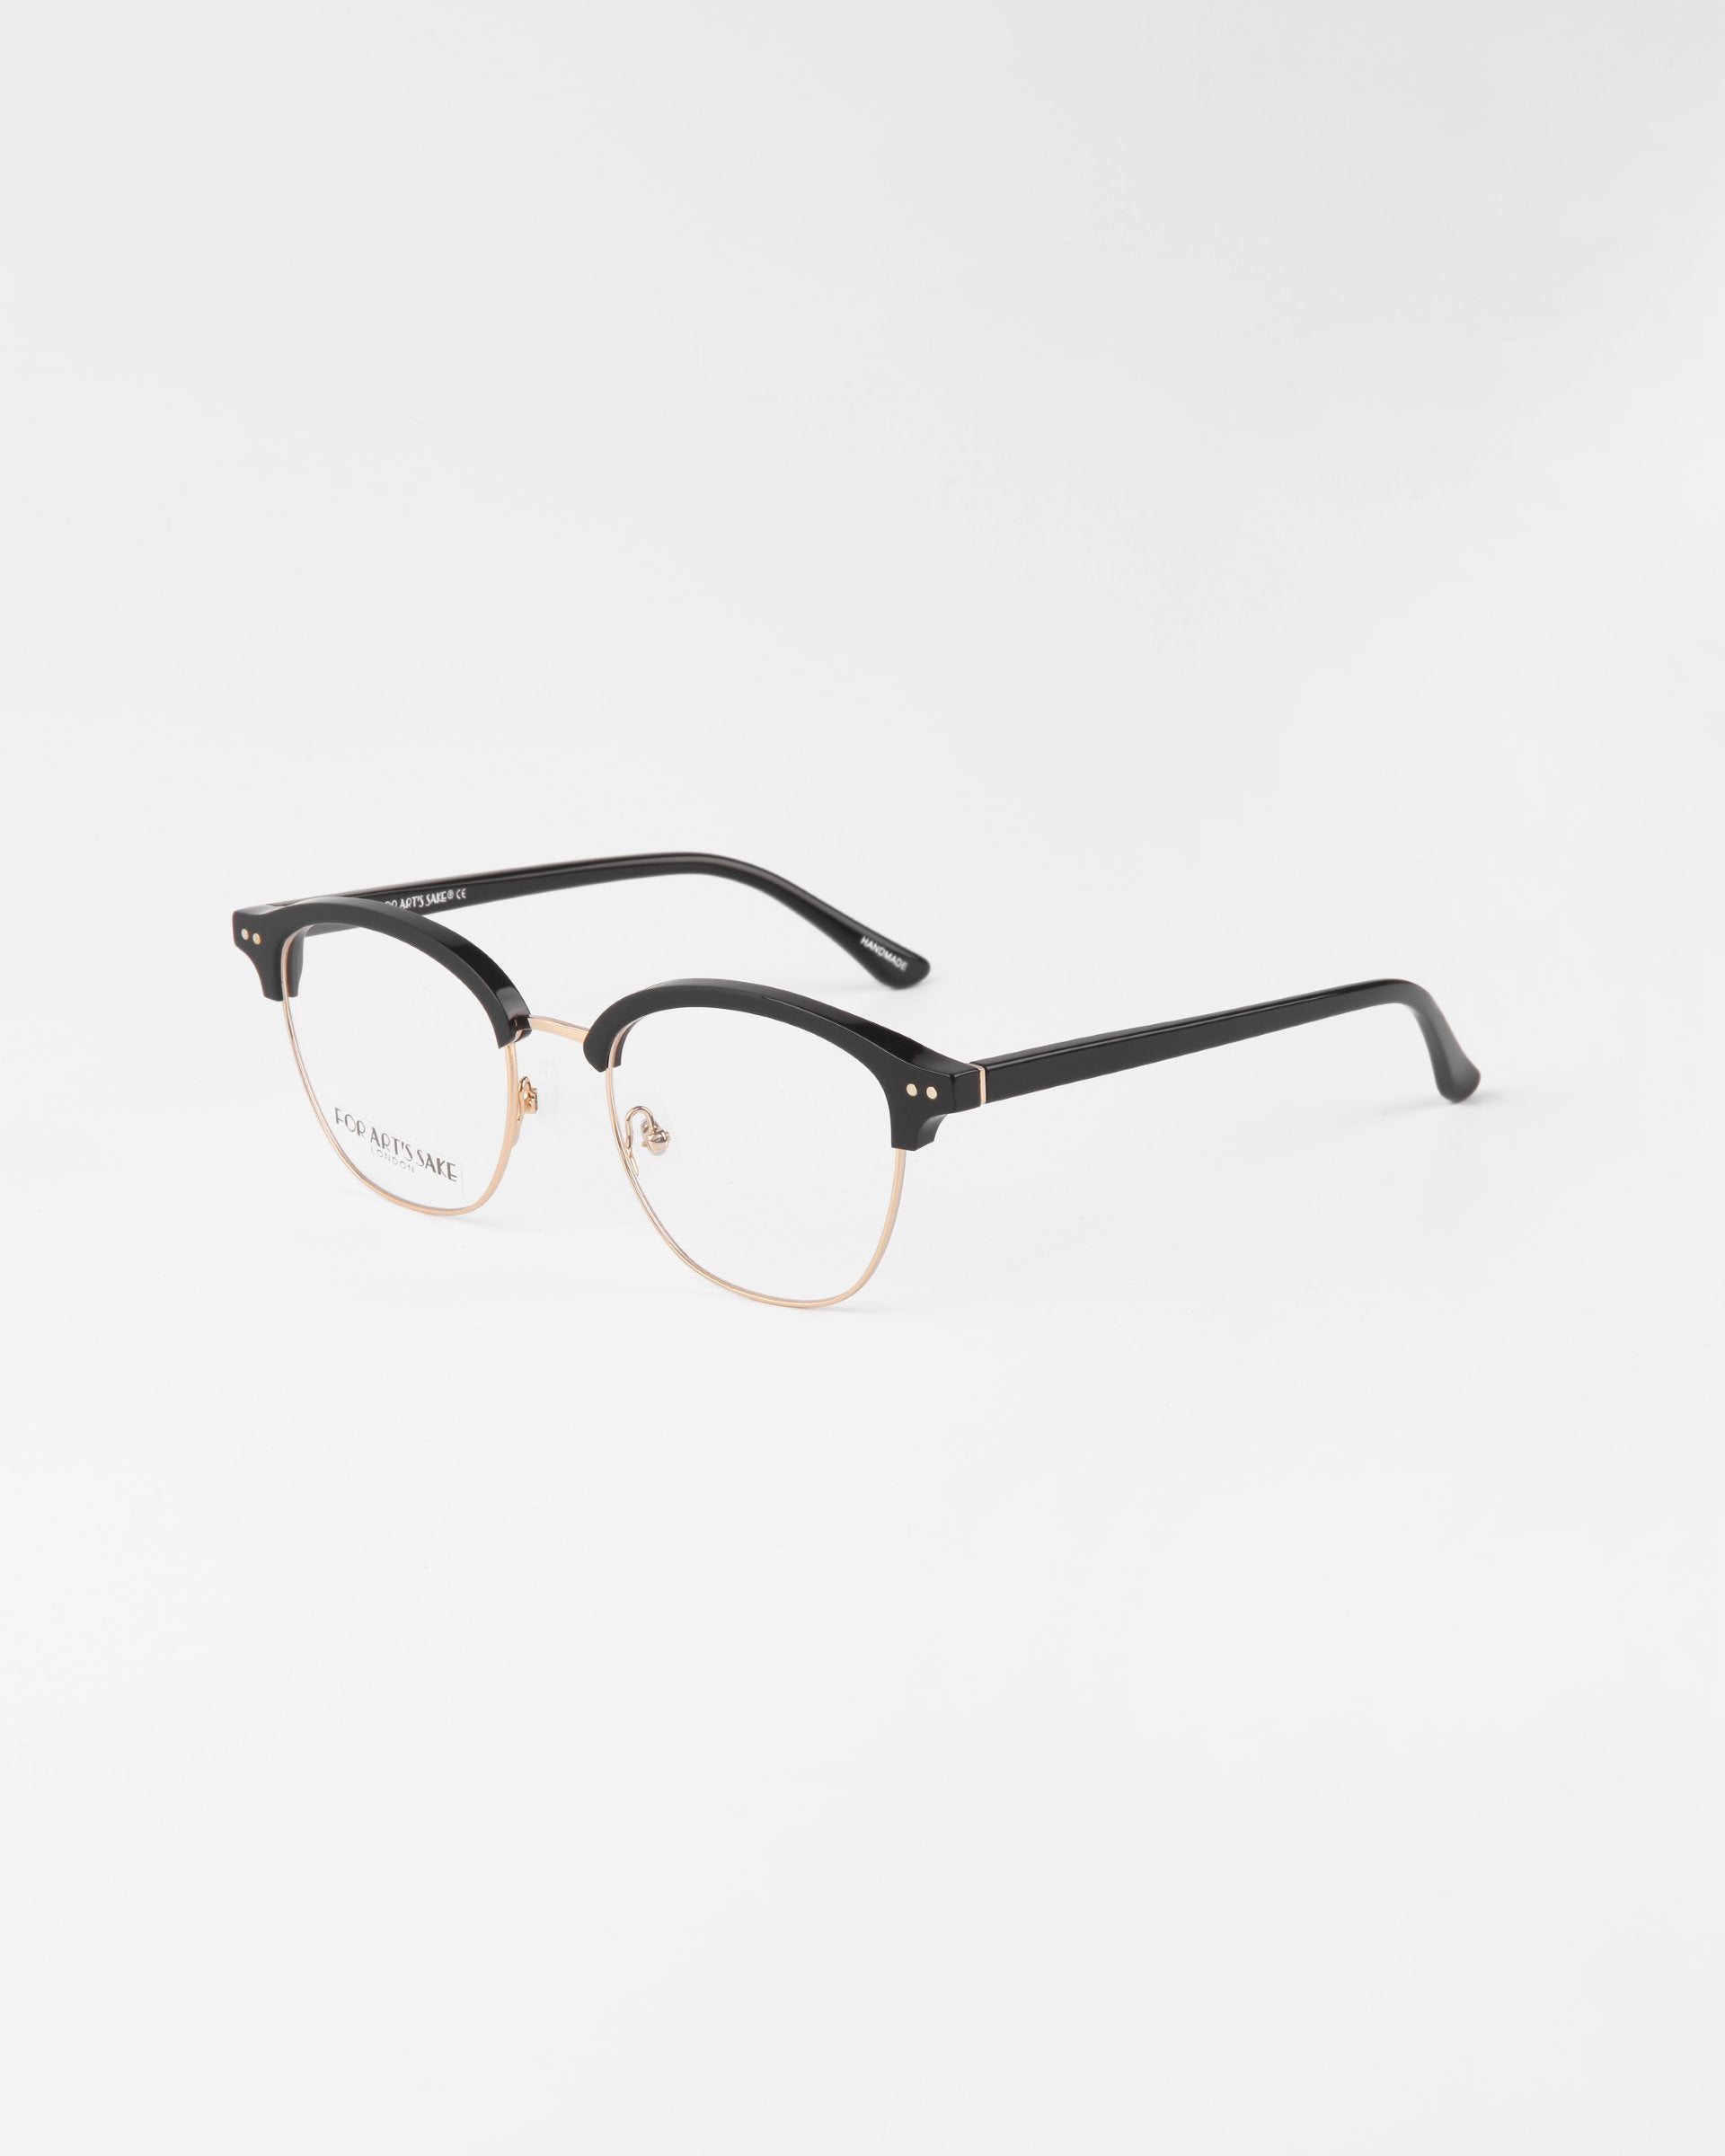 A pair of stylish For Art's Sake® Painkiller eyeglasses with black upper frames and golden rims, displayed against a white background. The temples are framed in black, and the bridge and nose pads are metallic gold, adding a chic and elegant touch to the overall design. These glasses also come with UV protection.